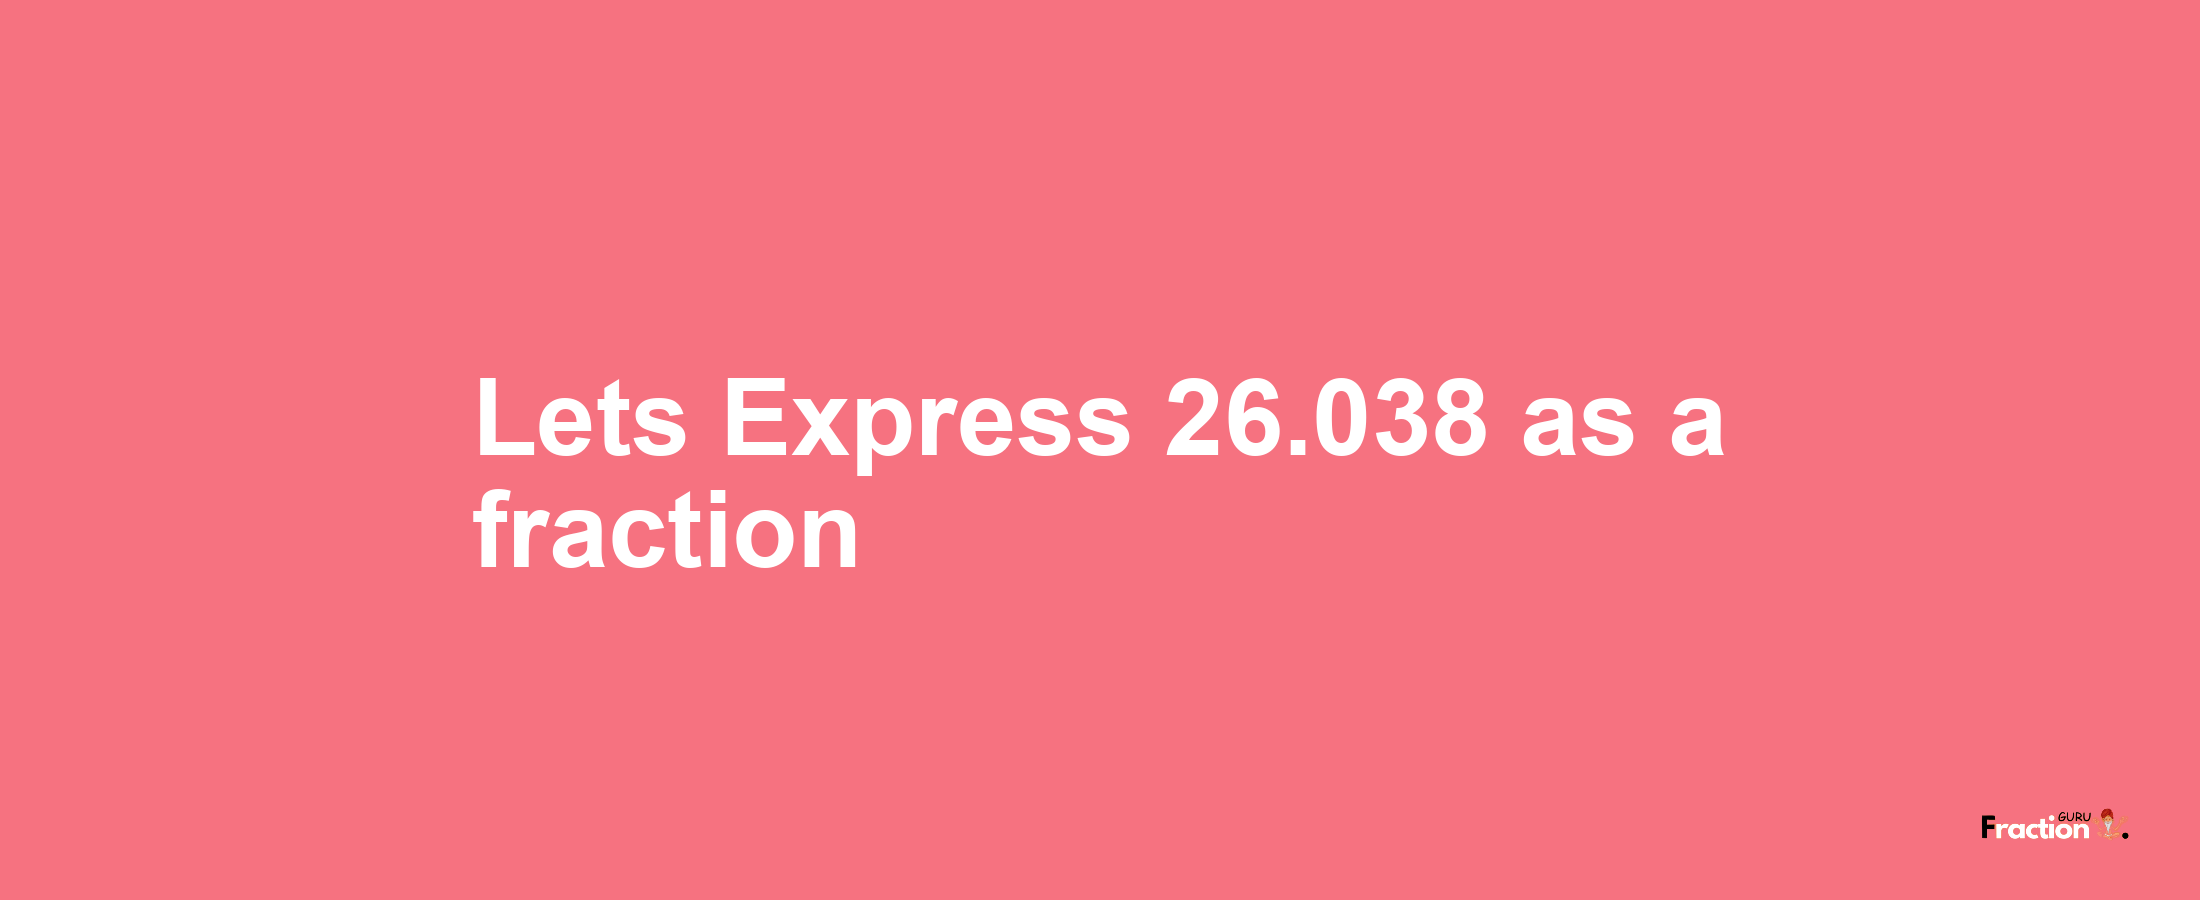 Lets Express 26.038 as afraction